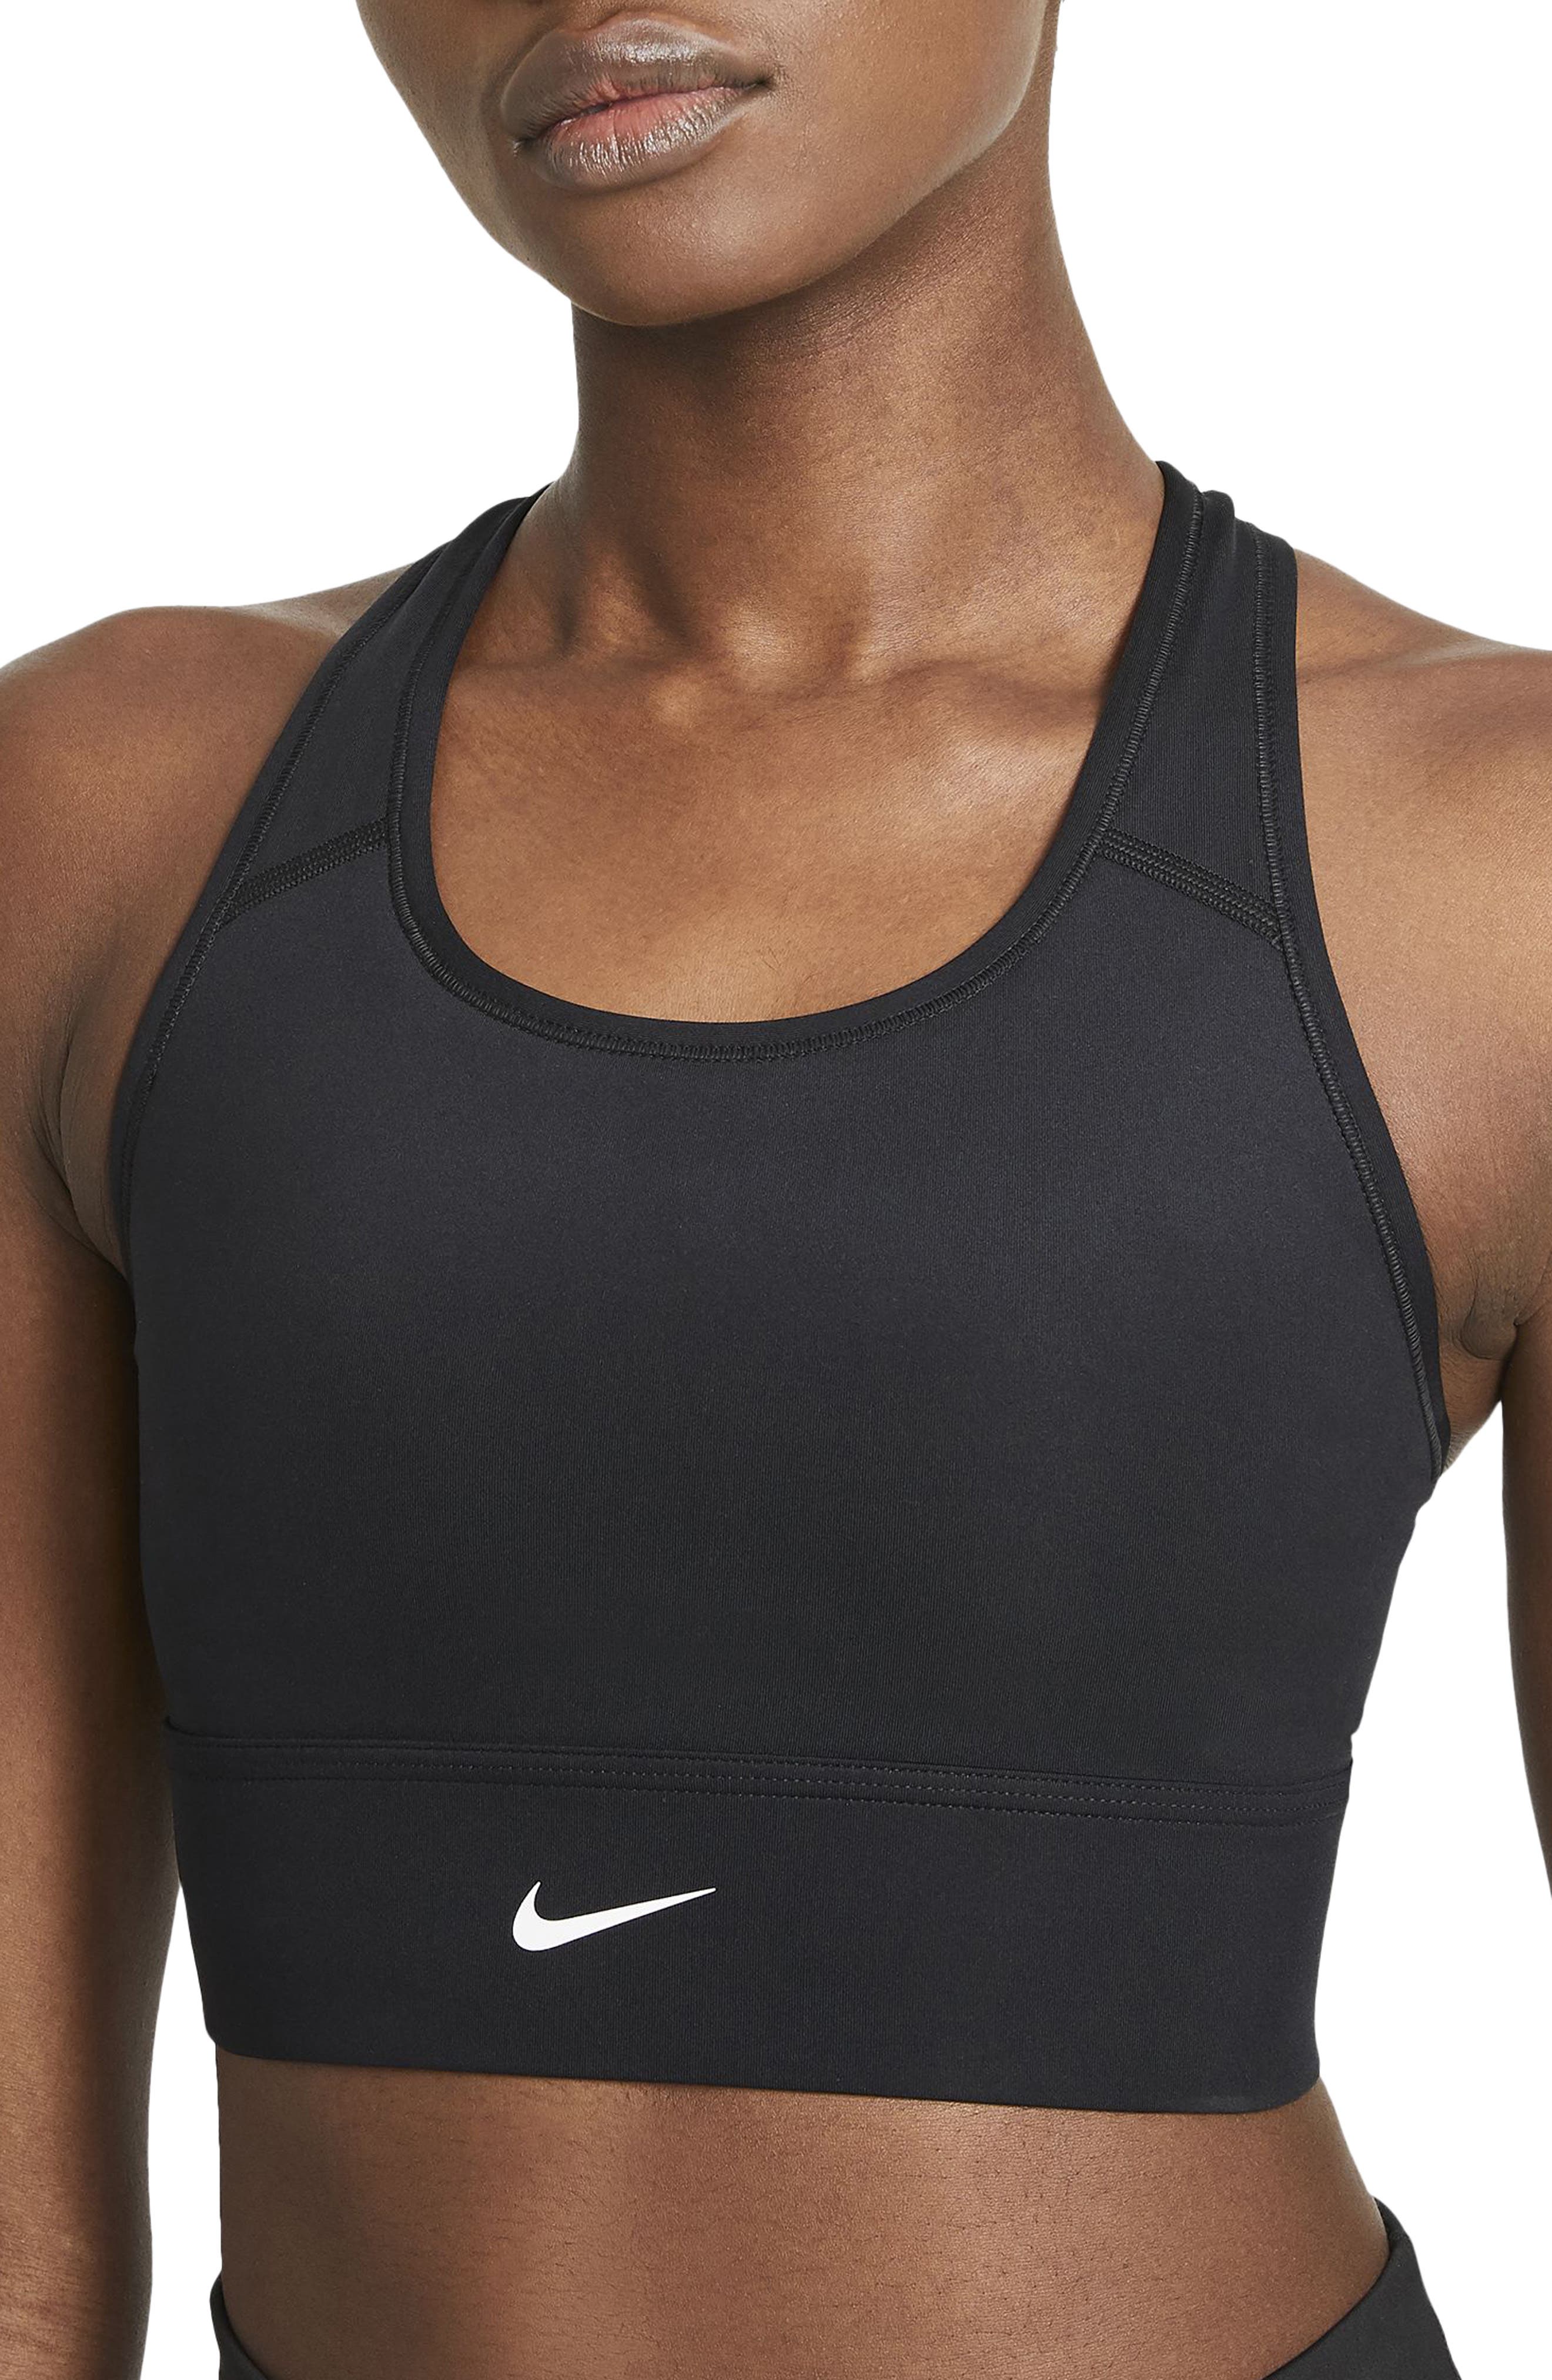 A New Standout Shape: Knix The Catalyst, These Are the 12 Best Sports  Bras, According to Our Instagram Followers